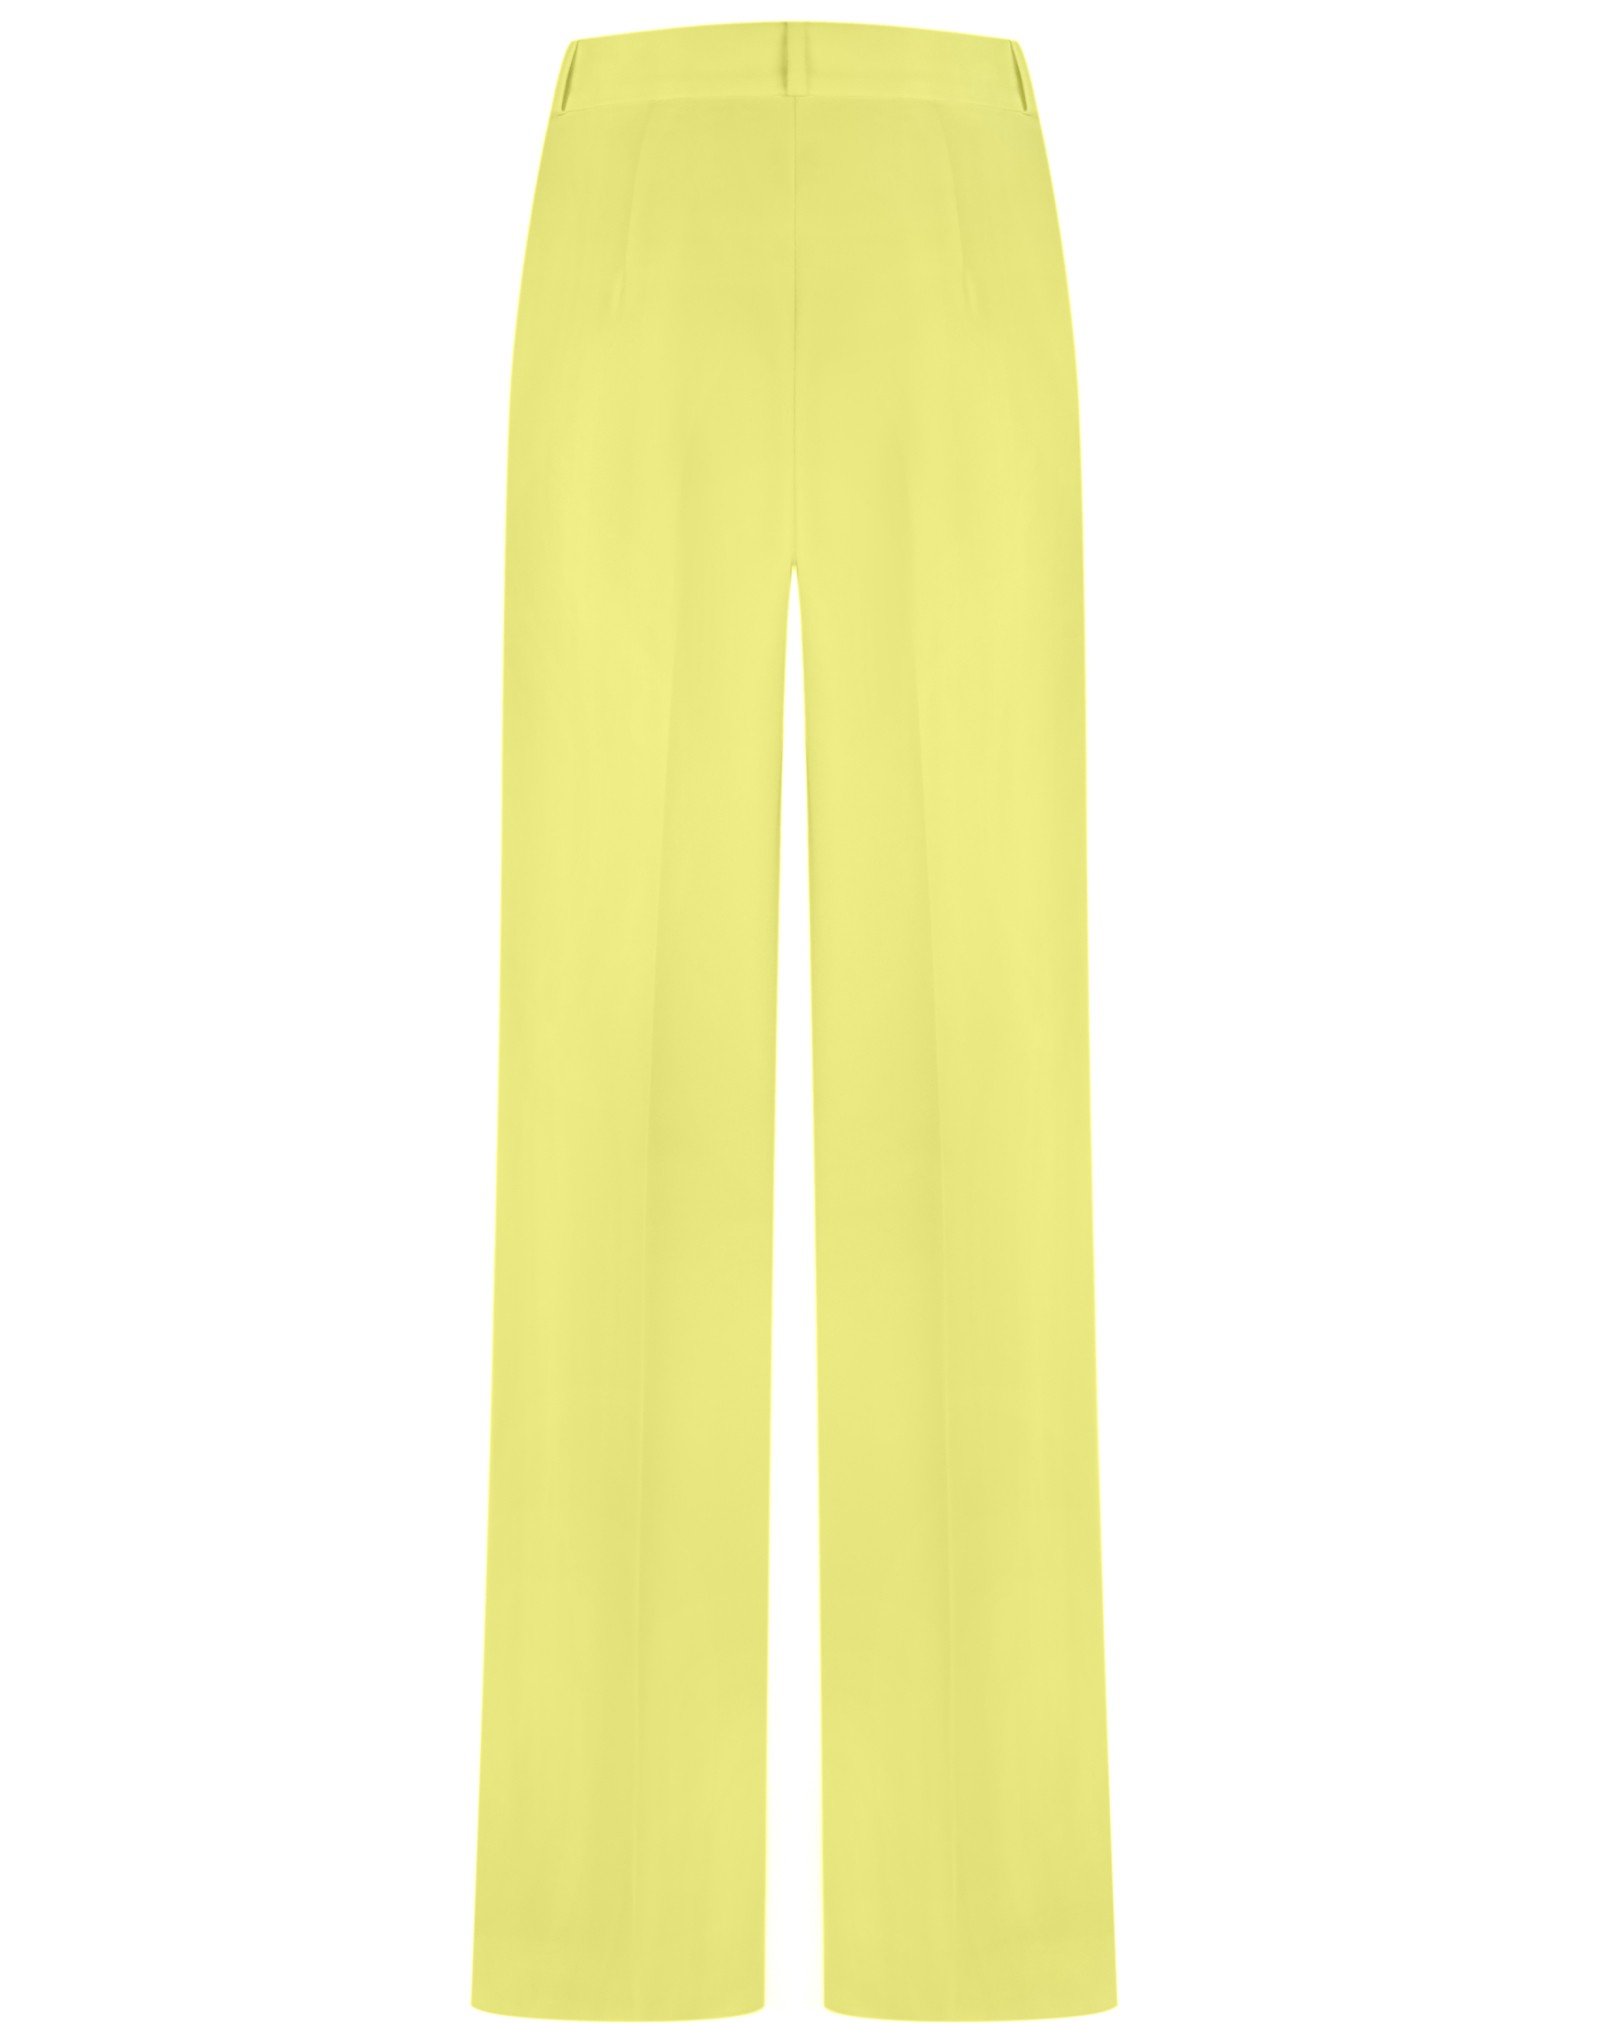 Pants with arrows made of suit fabric yellow